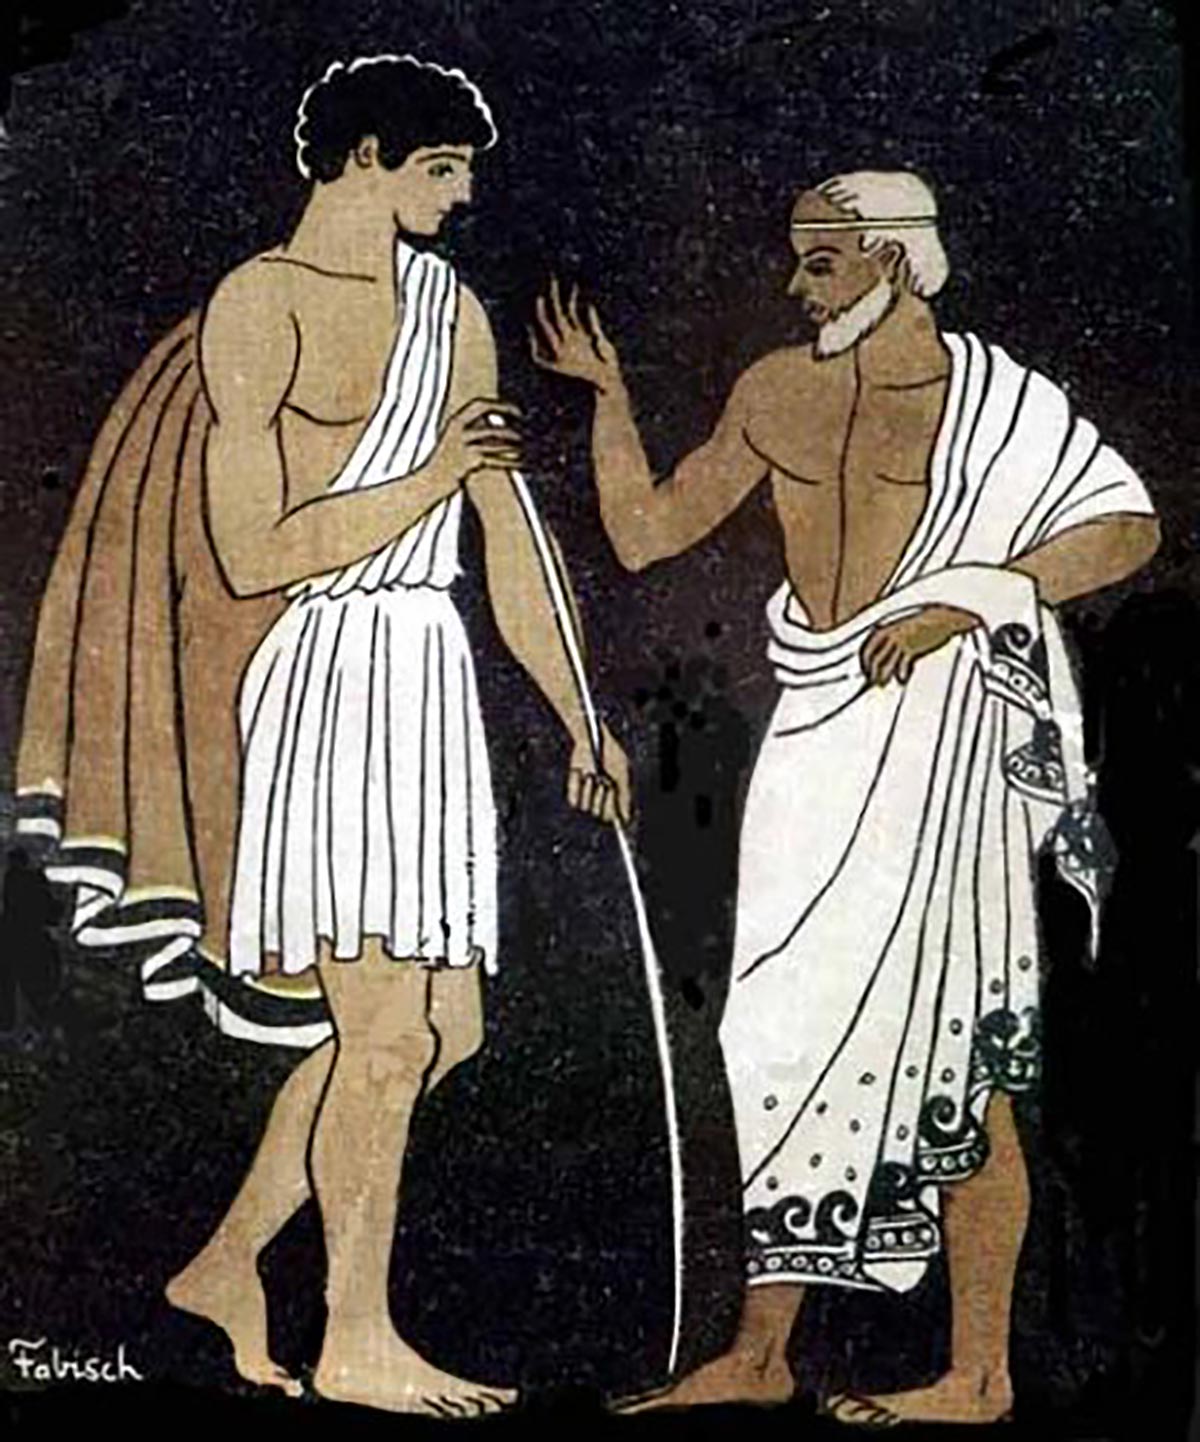 Description: a young man listens to an older, bearded man with white hair, who gestures as he speaks. Both wear white ancient Greek robes. The drawing is flat and stylized in a manner reminiscent of ancient Greek painting. The image is signed "Fabisch".